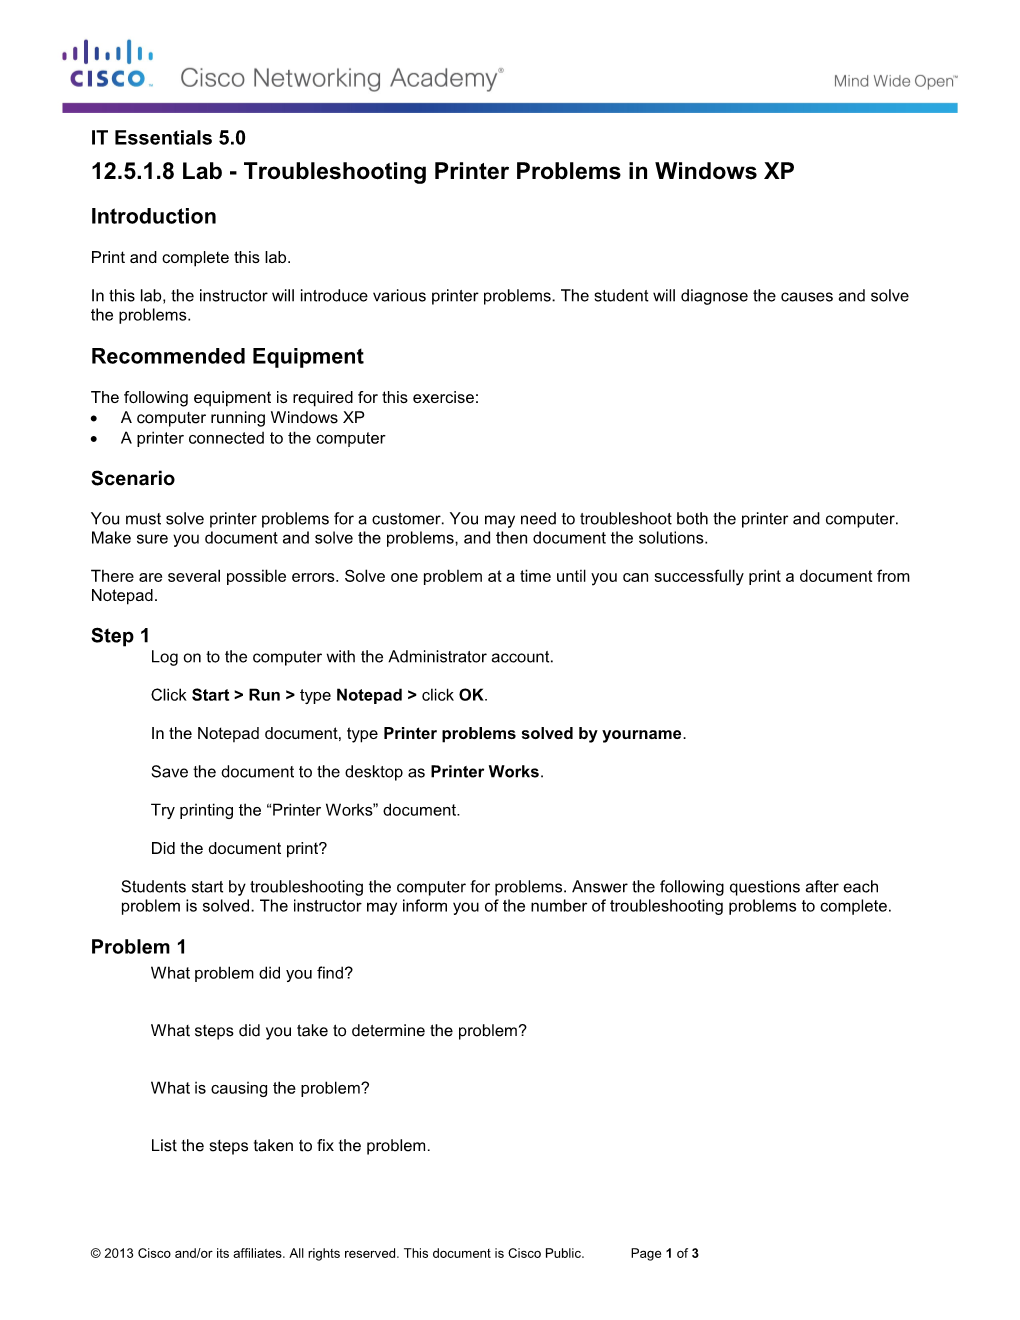 12.5.1.8 Lab - Troubleshooting Printer Problems in Windows XP